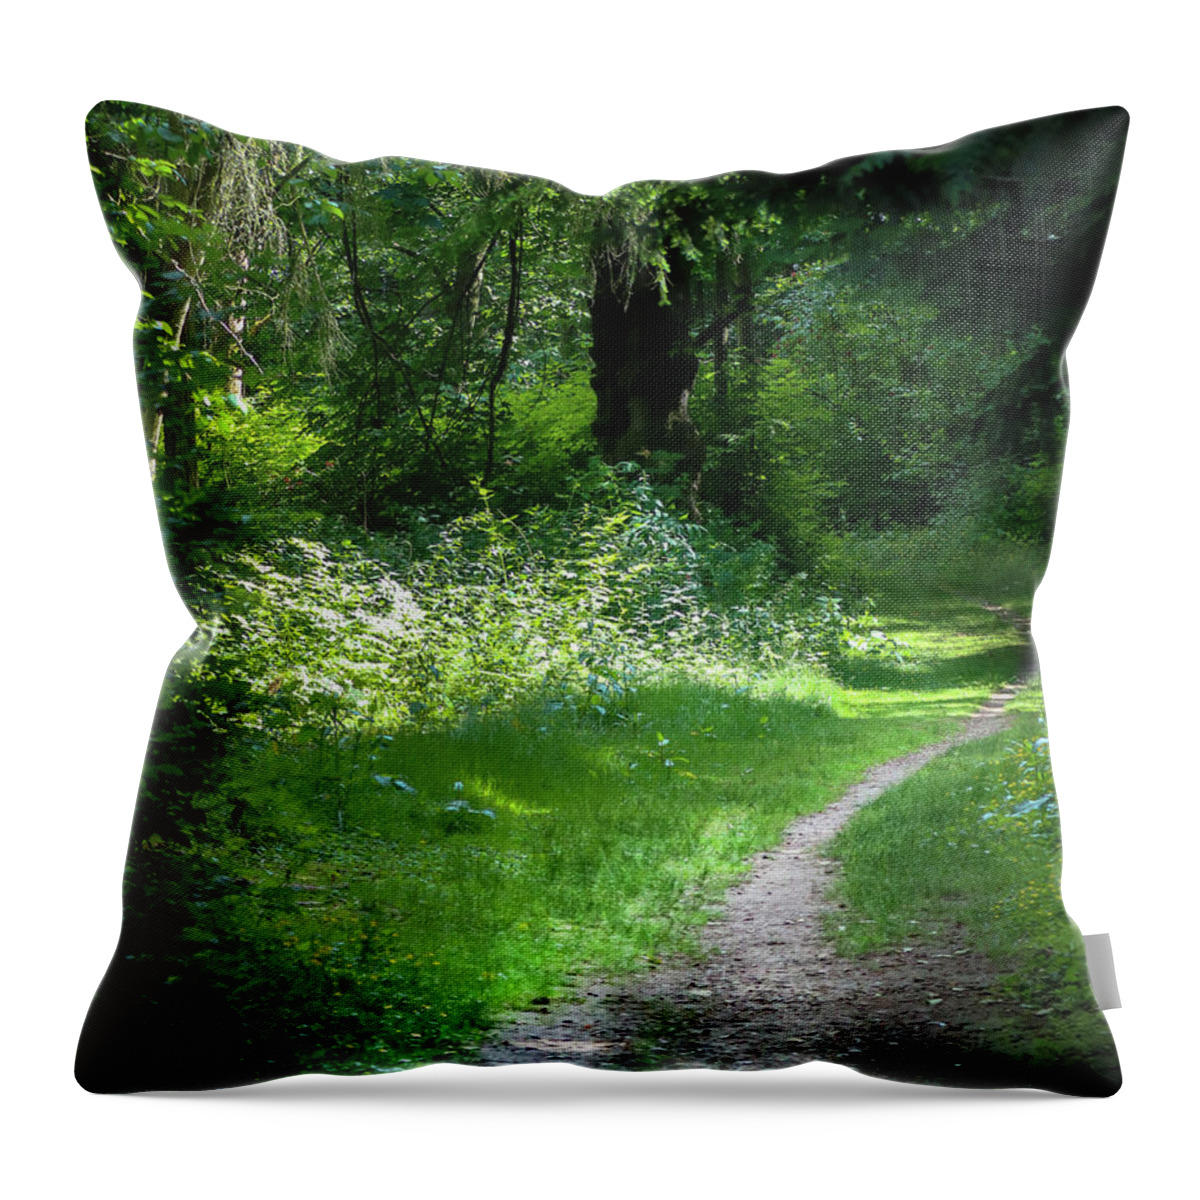 Hiking Throw Pillow featuring the photograph Invitation Path by D Lee